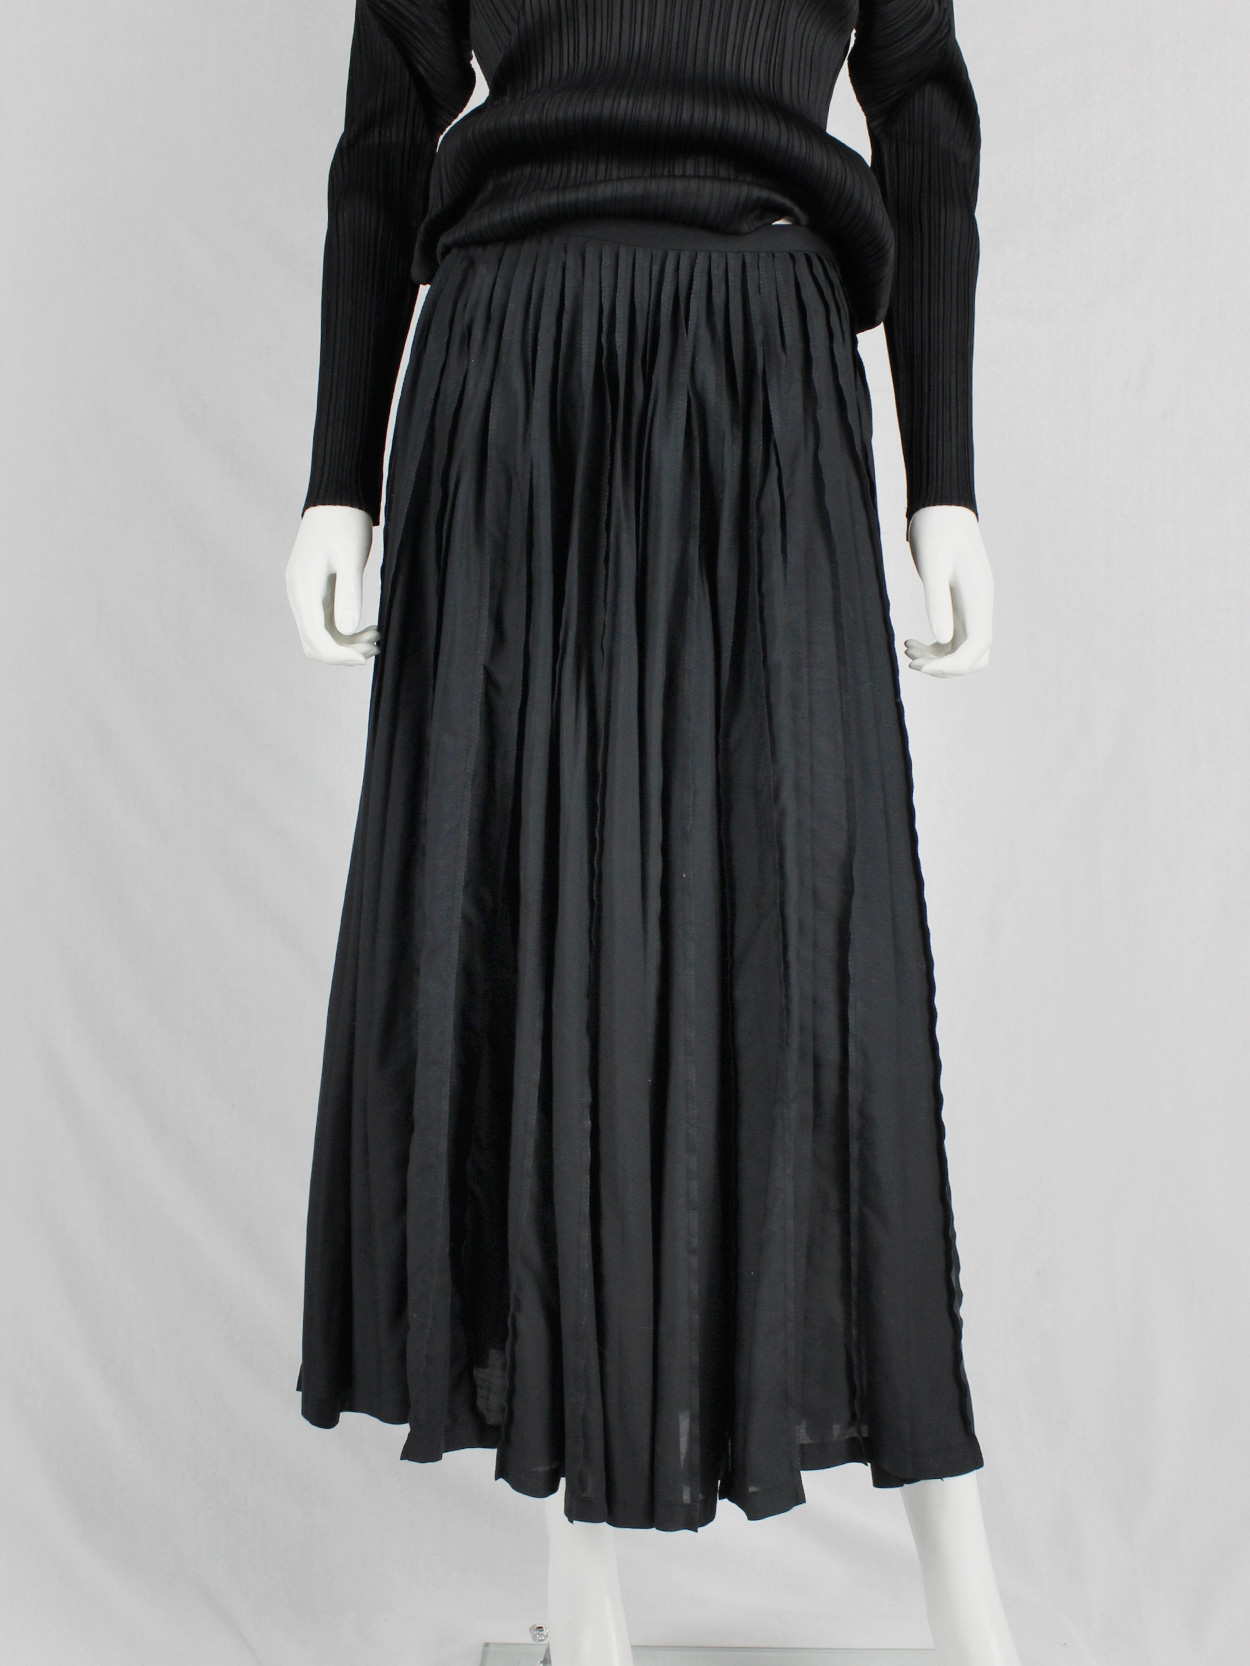 Issey Miyake black maxi skirt with inside out pleats - V A N II T A S